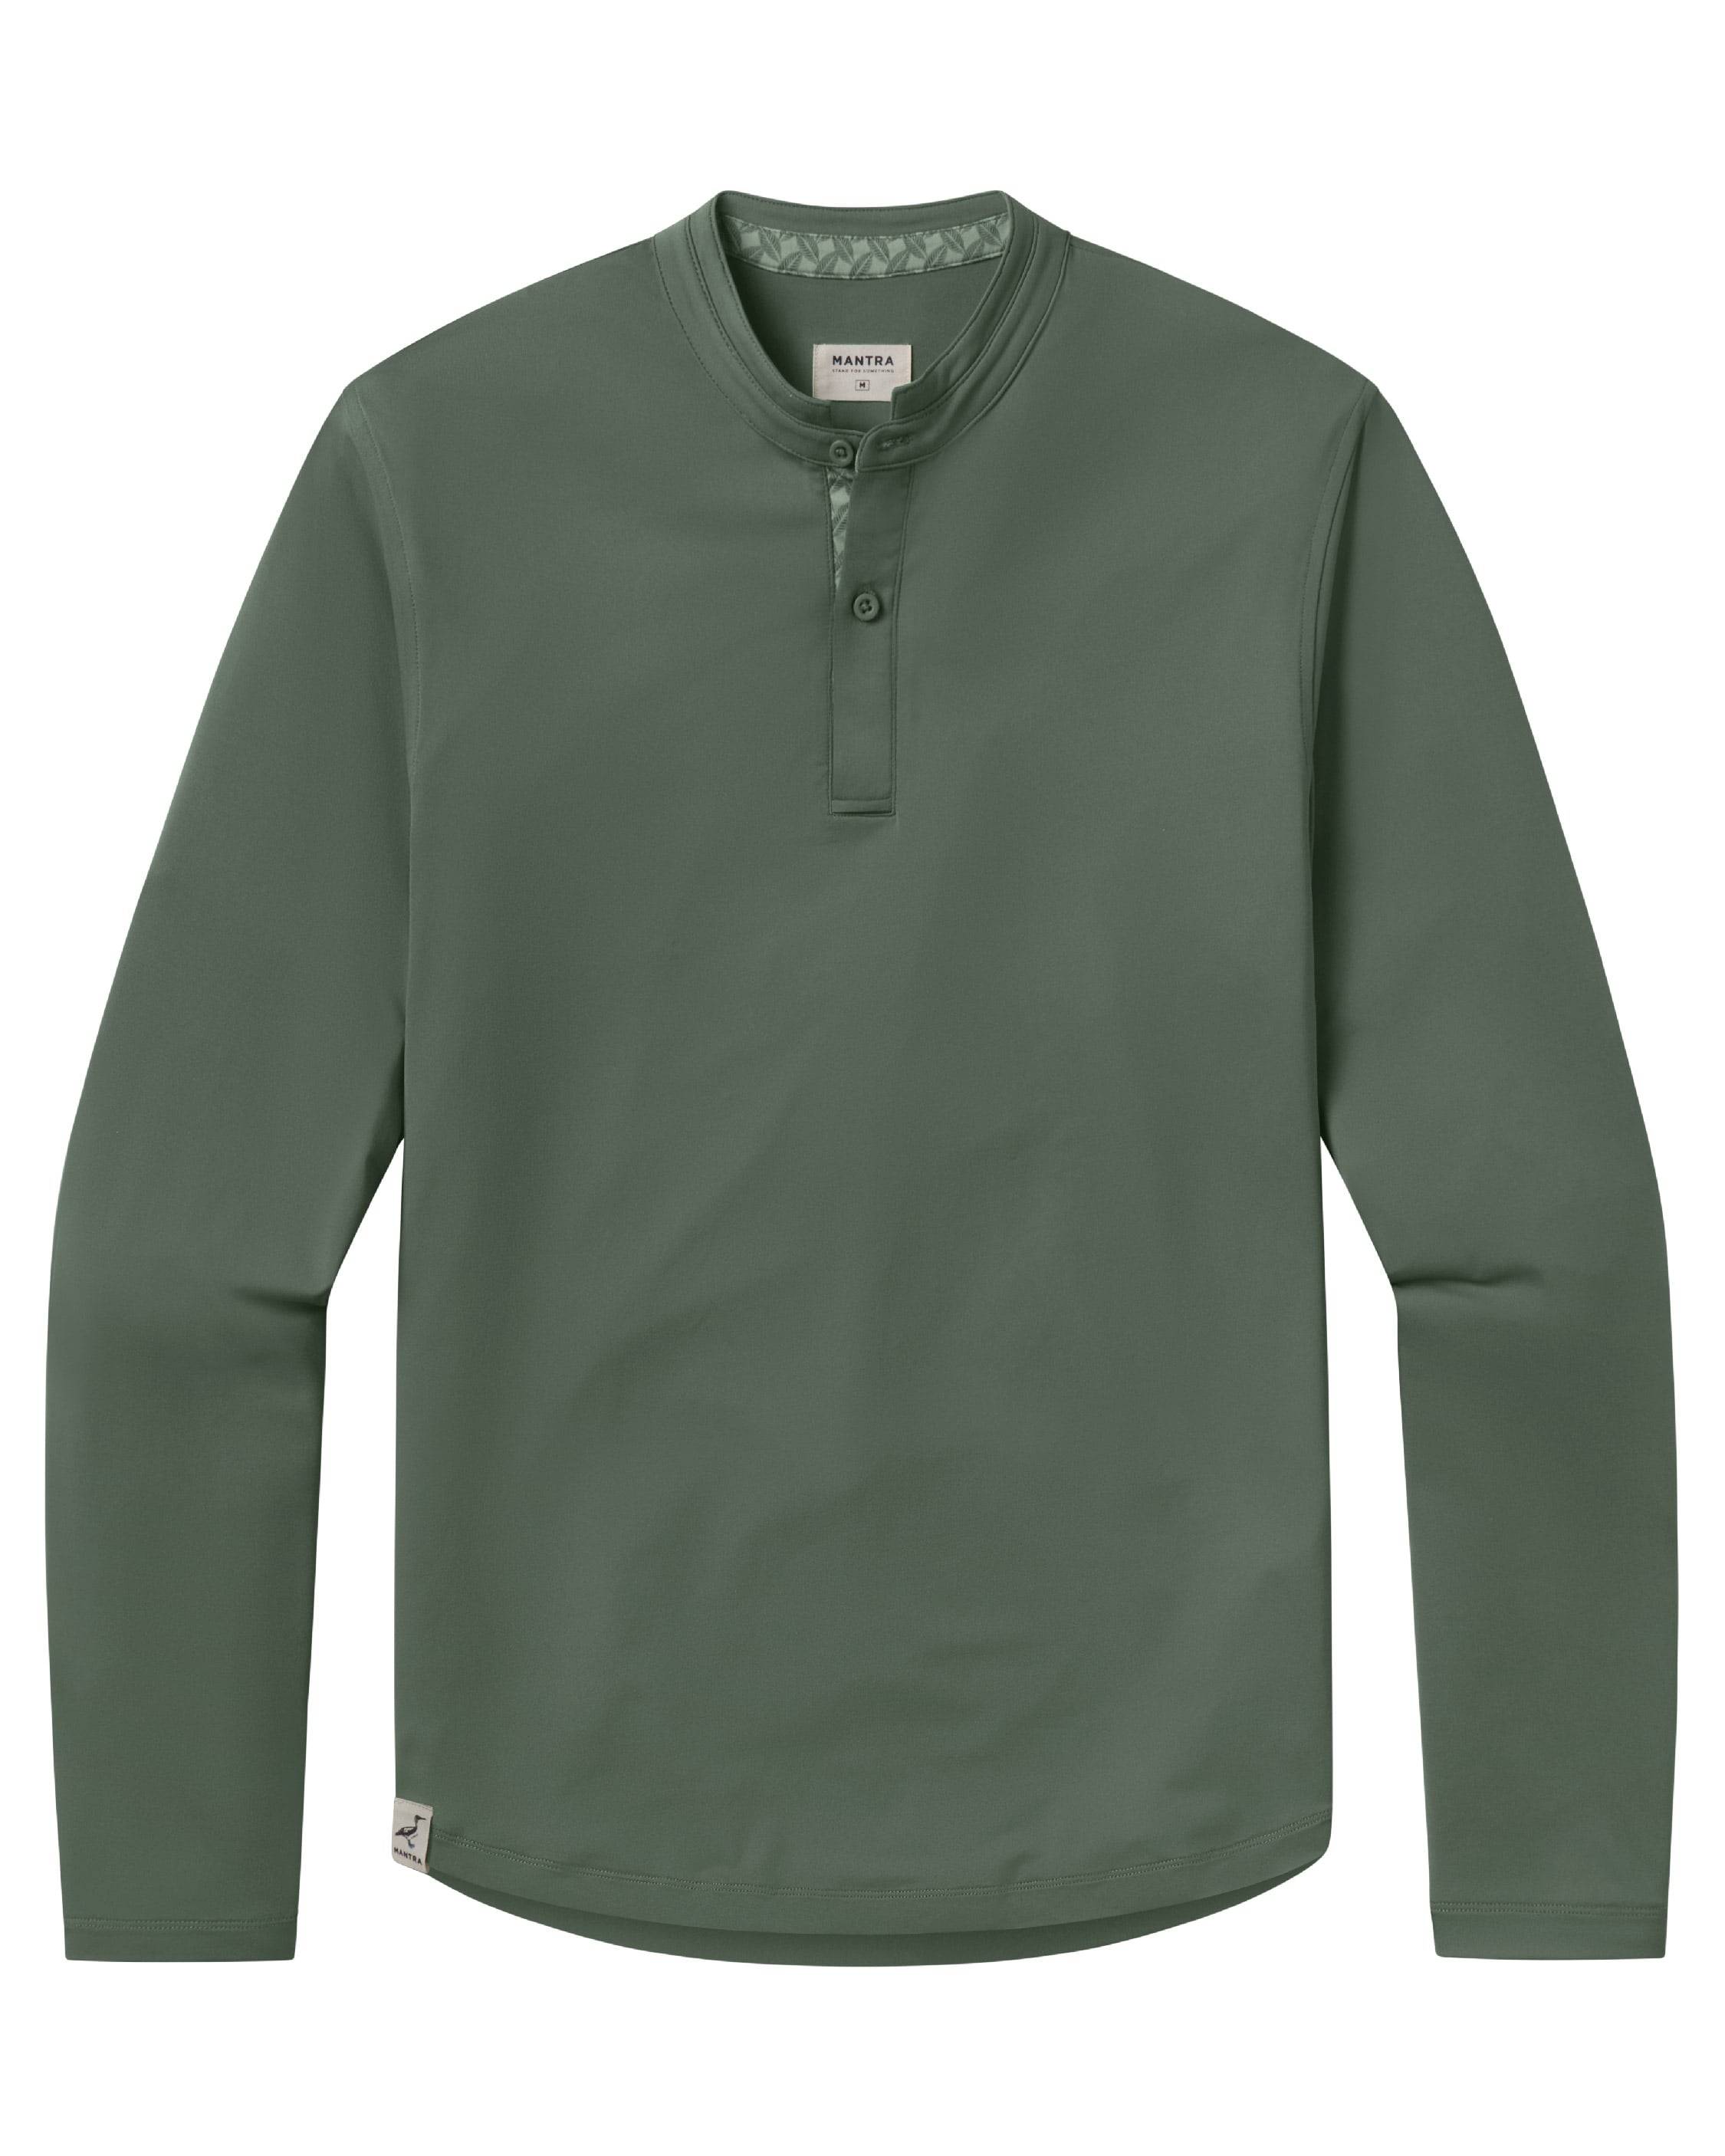 CATALYST POLO L/S - MANTRA COLLAR - CANOPY CONTRAST color selector